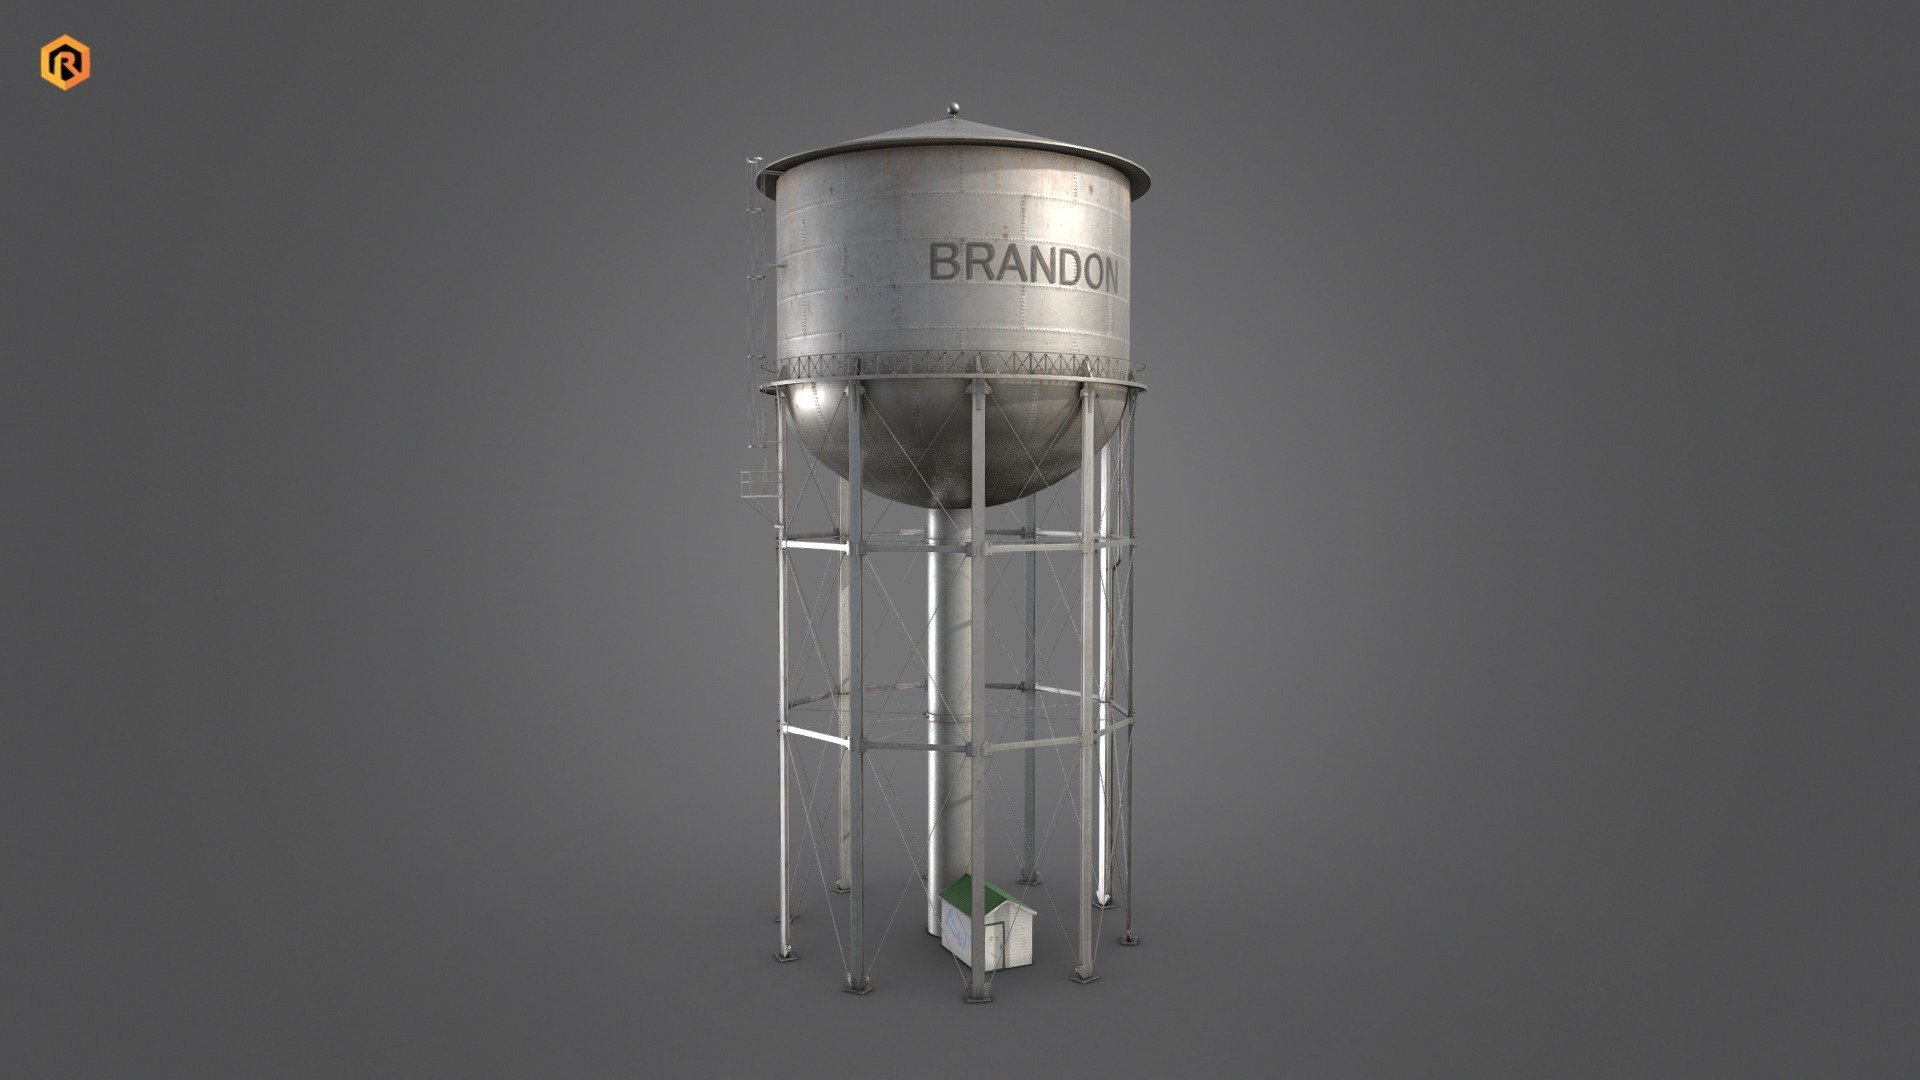 Low-poly PBR 3D model of Water Tower.

This 3D model is best for use in games and other VR / AR, real-time applications such as Unity or Unreal Engine.  It can also be rendered in Blender (ex Cycles) or Vray as the model is equipped with all required PBR textures.  

Technical details:




2 PBR textures sets (Main body and alpha) 

12626 Triangles

15343  Vertices

The model is divided into few 2 objects (Main tower and small building)

Pivot points are correctly placed to suit animation process.

All nodes, materials and textures are appropriately named.

Lot of additional file formats included (Blender, Unity, Maya etc.)  

More file formats are available in additional zip file on product page (See all files)

Please feel free to contact me if you have any questions or need any support for this asset.

Support e-mail: support@rescue3d.com - Water Tower - Buy Royalty Free 3D model by Rescue3D Assets (@rescue3d) 3d model